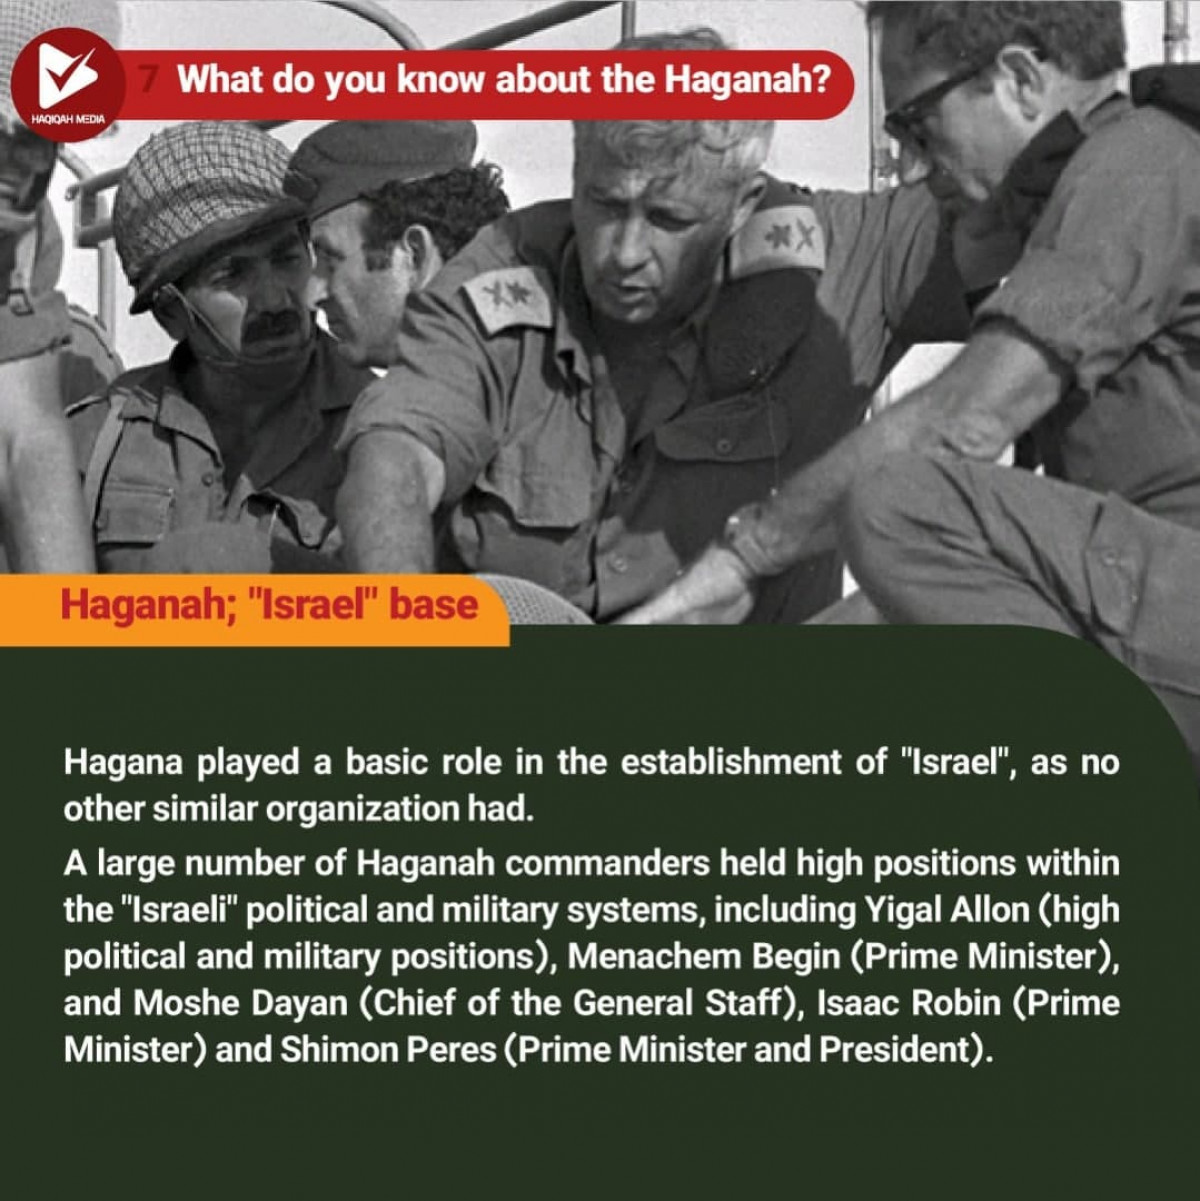 What do you know about the Haganah? 7